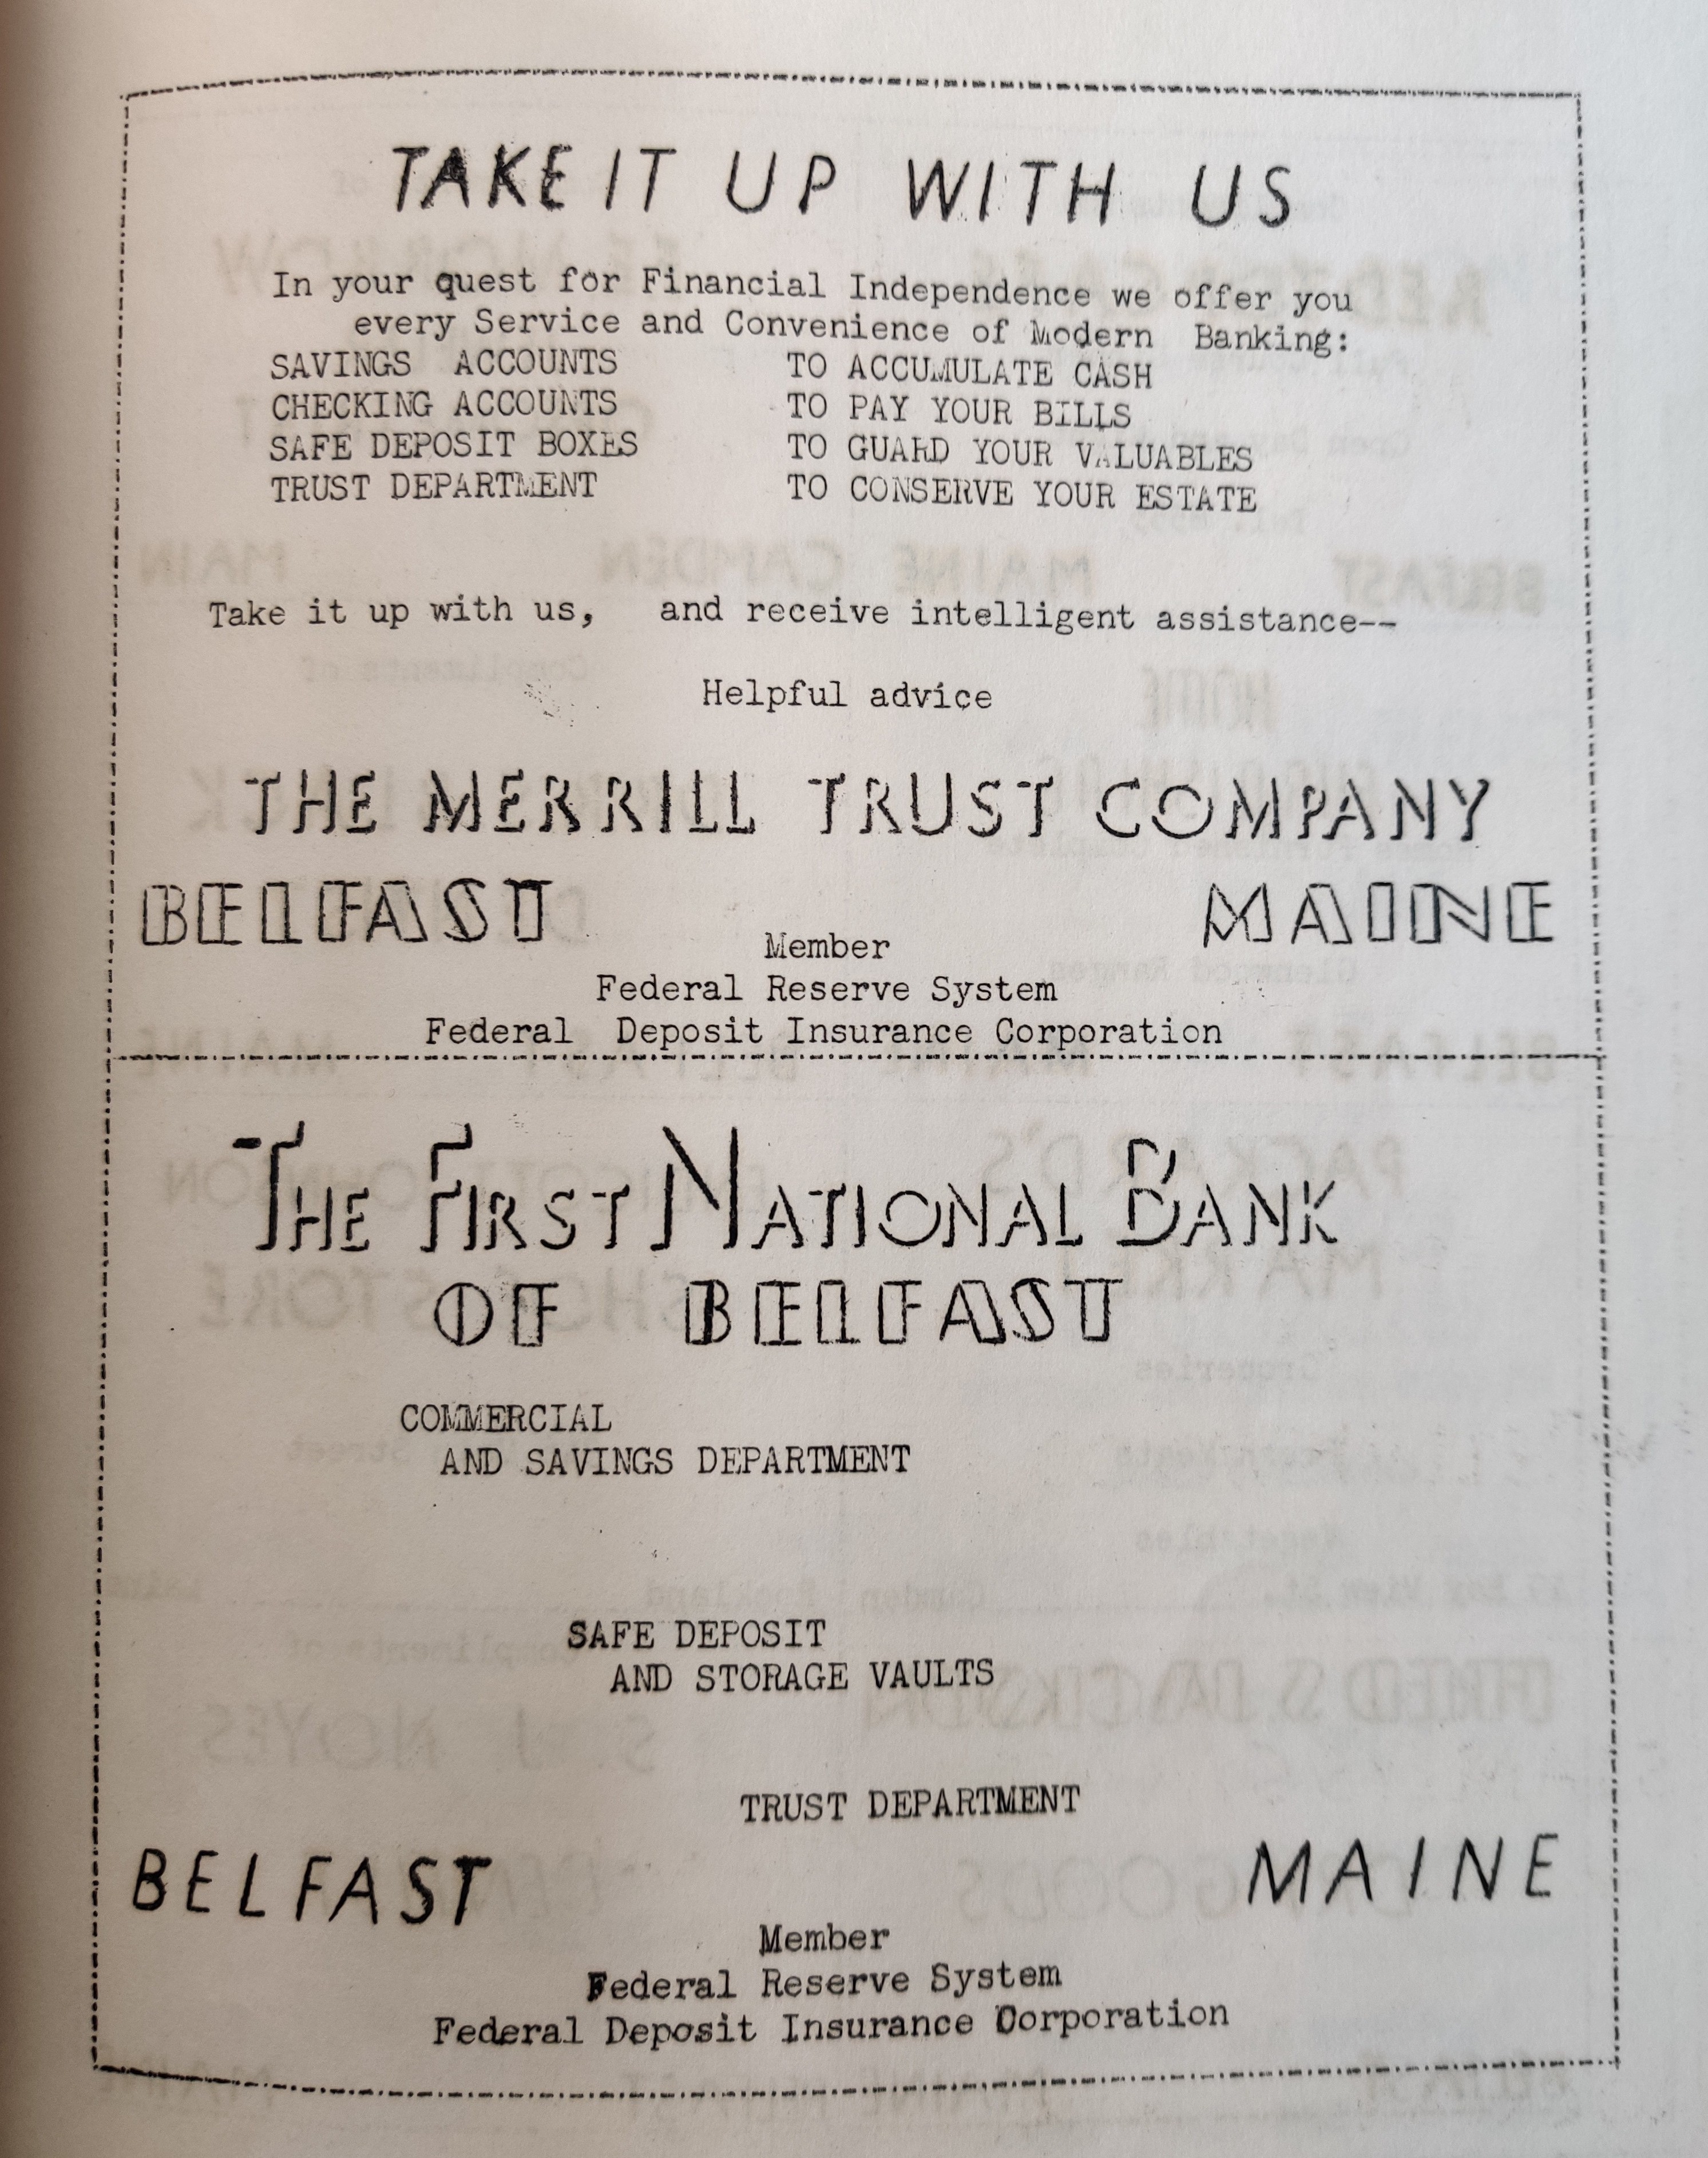 Some advertisements, including one of the First National Bank of Belfast.